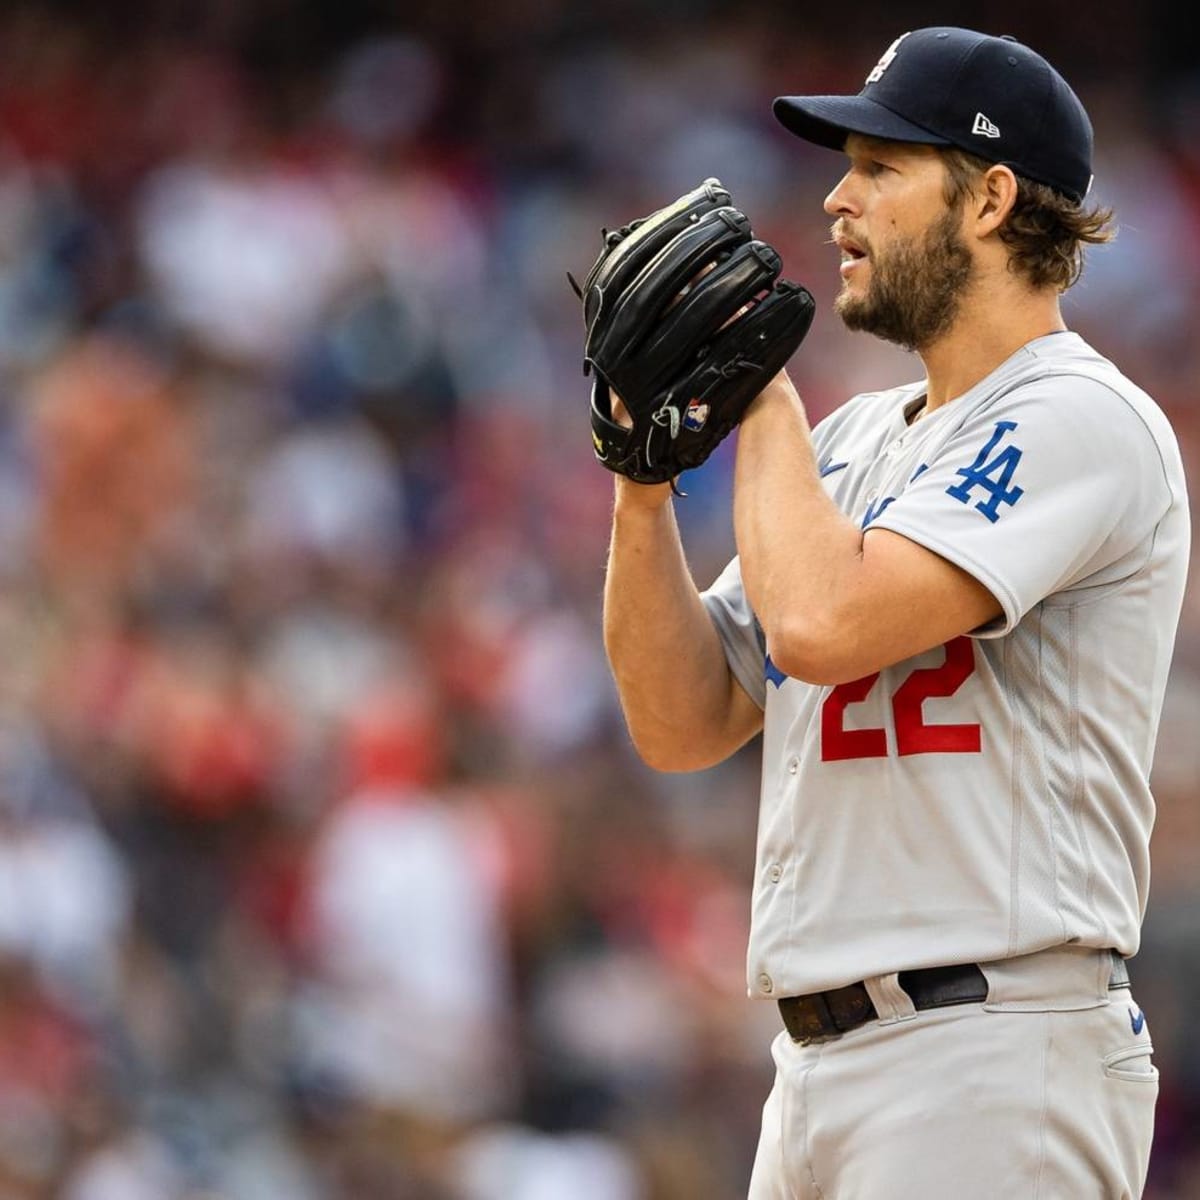 Dodgers, Clayton Kershaw agree to one-year deal: report